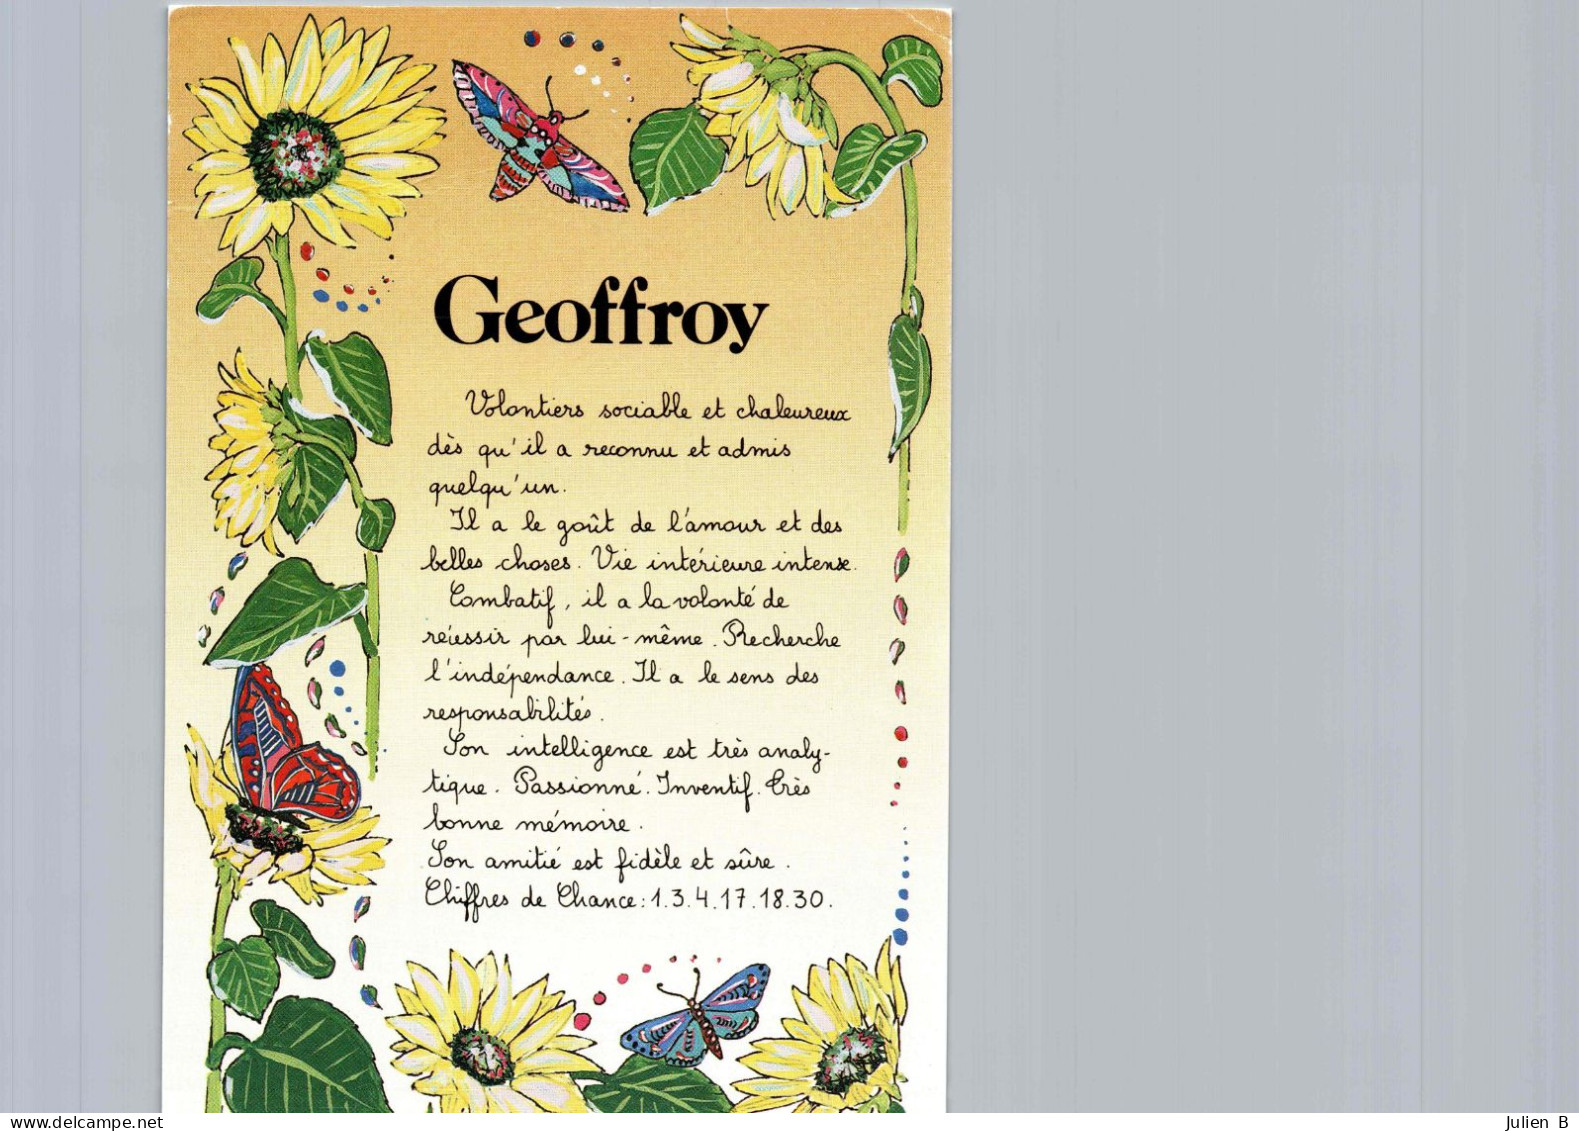 Geoffroy, Edition Andre Barthelemy - Nomi